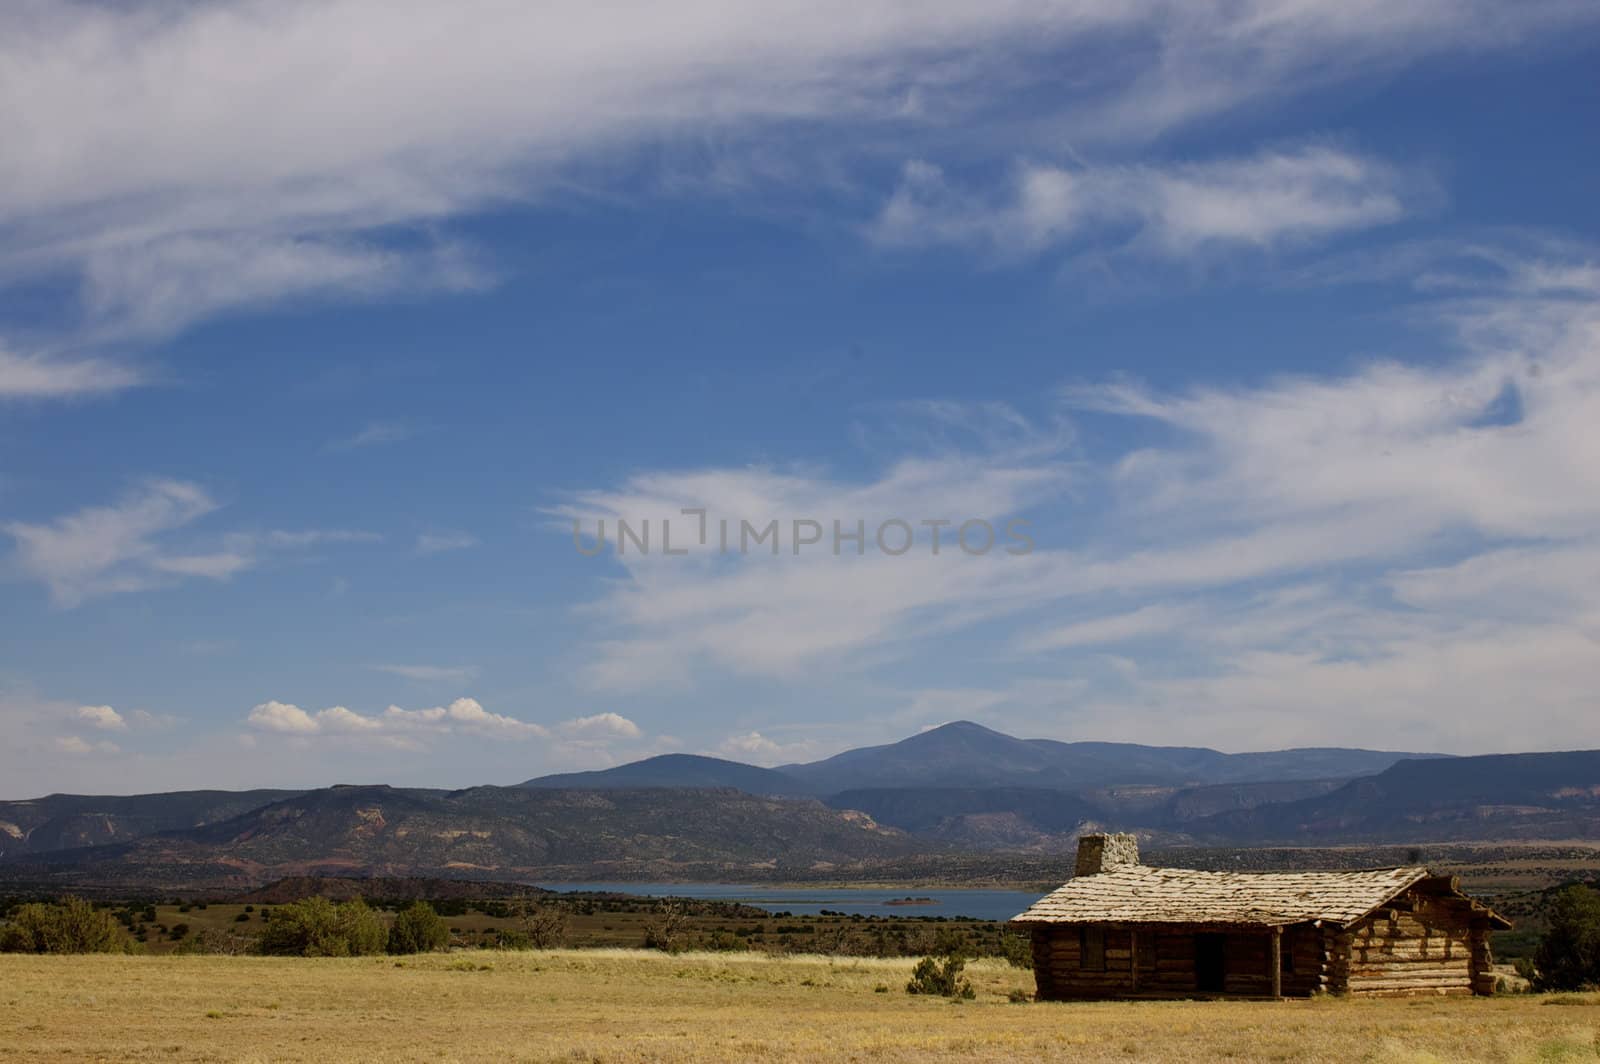 Rustic 'wild west' style log cabin against a blue sky, mountains and desert with copy space.